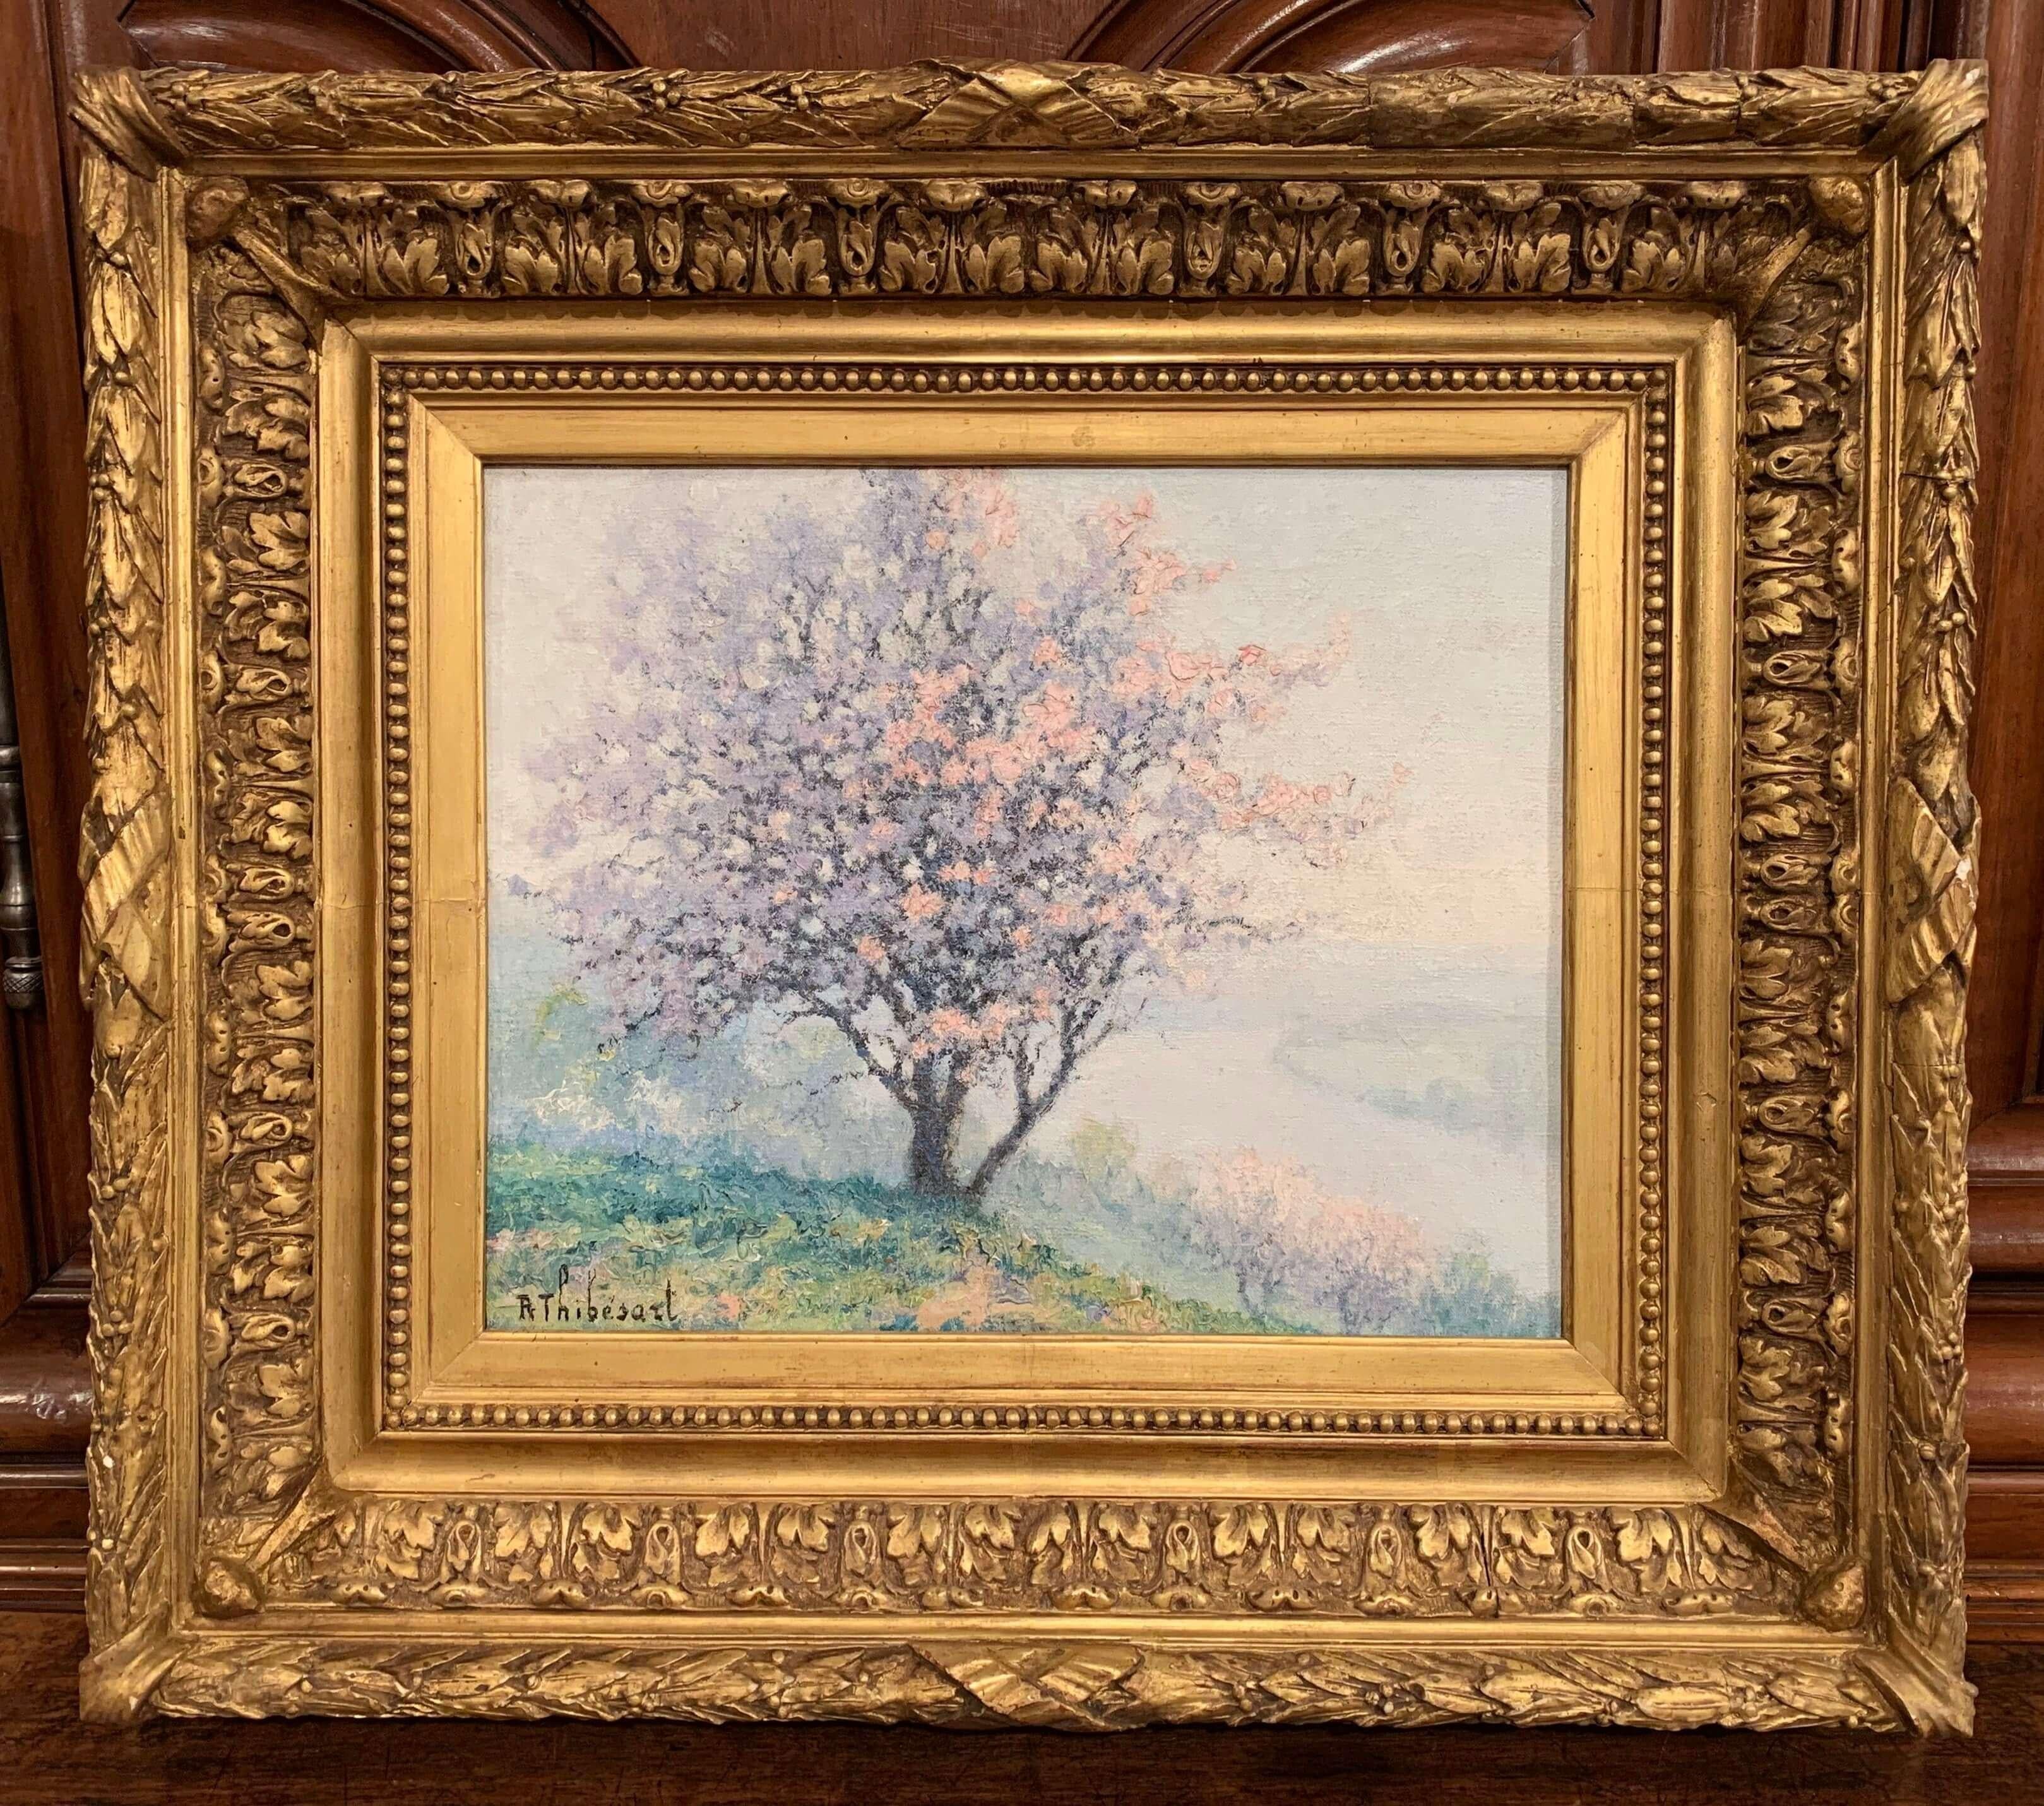 20th Century French Oil on Canvas Painting in Gilt Frame 